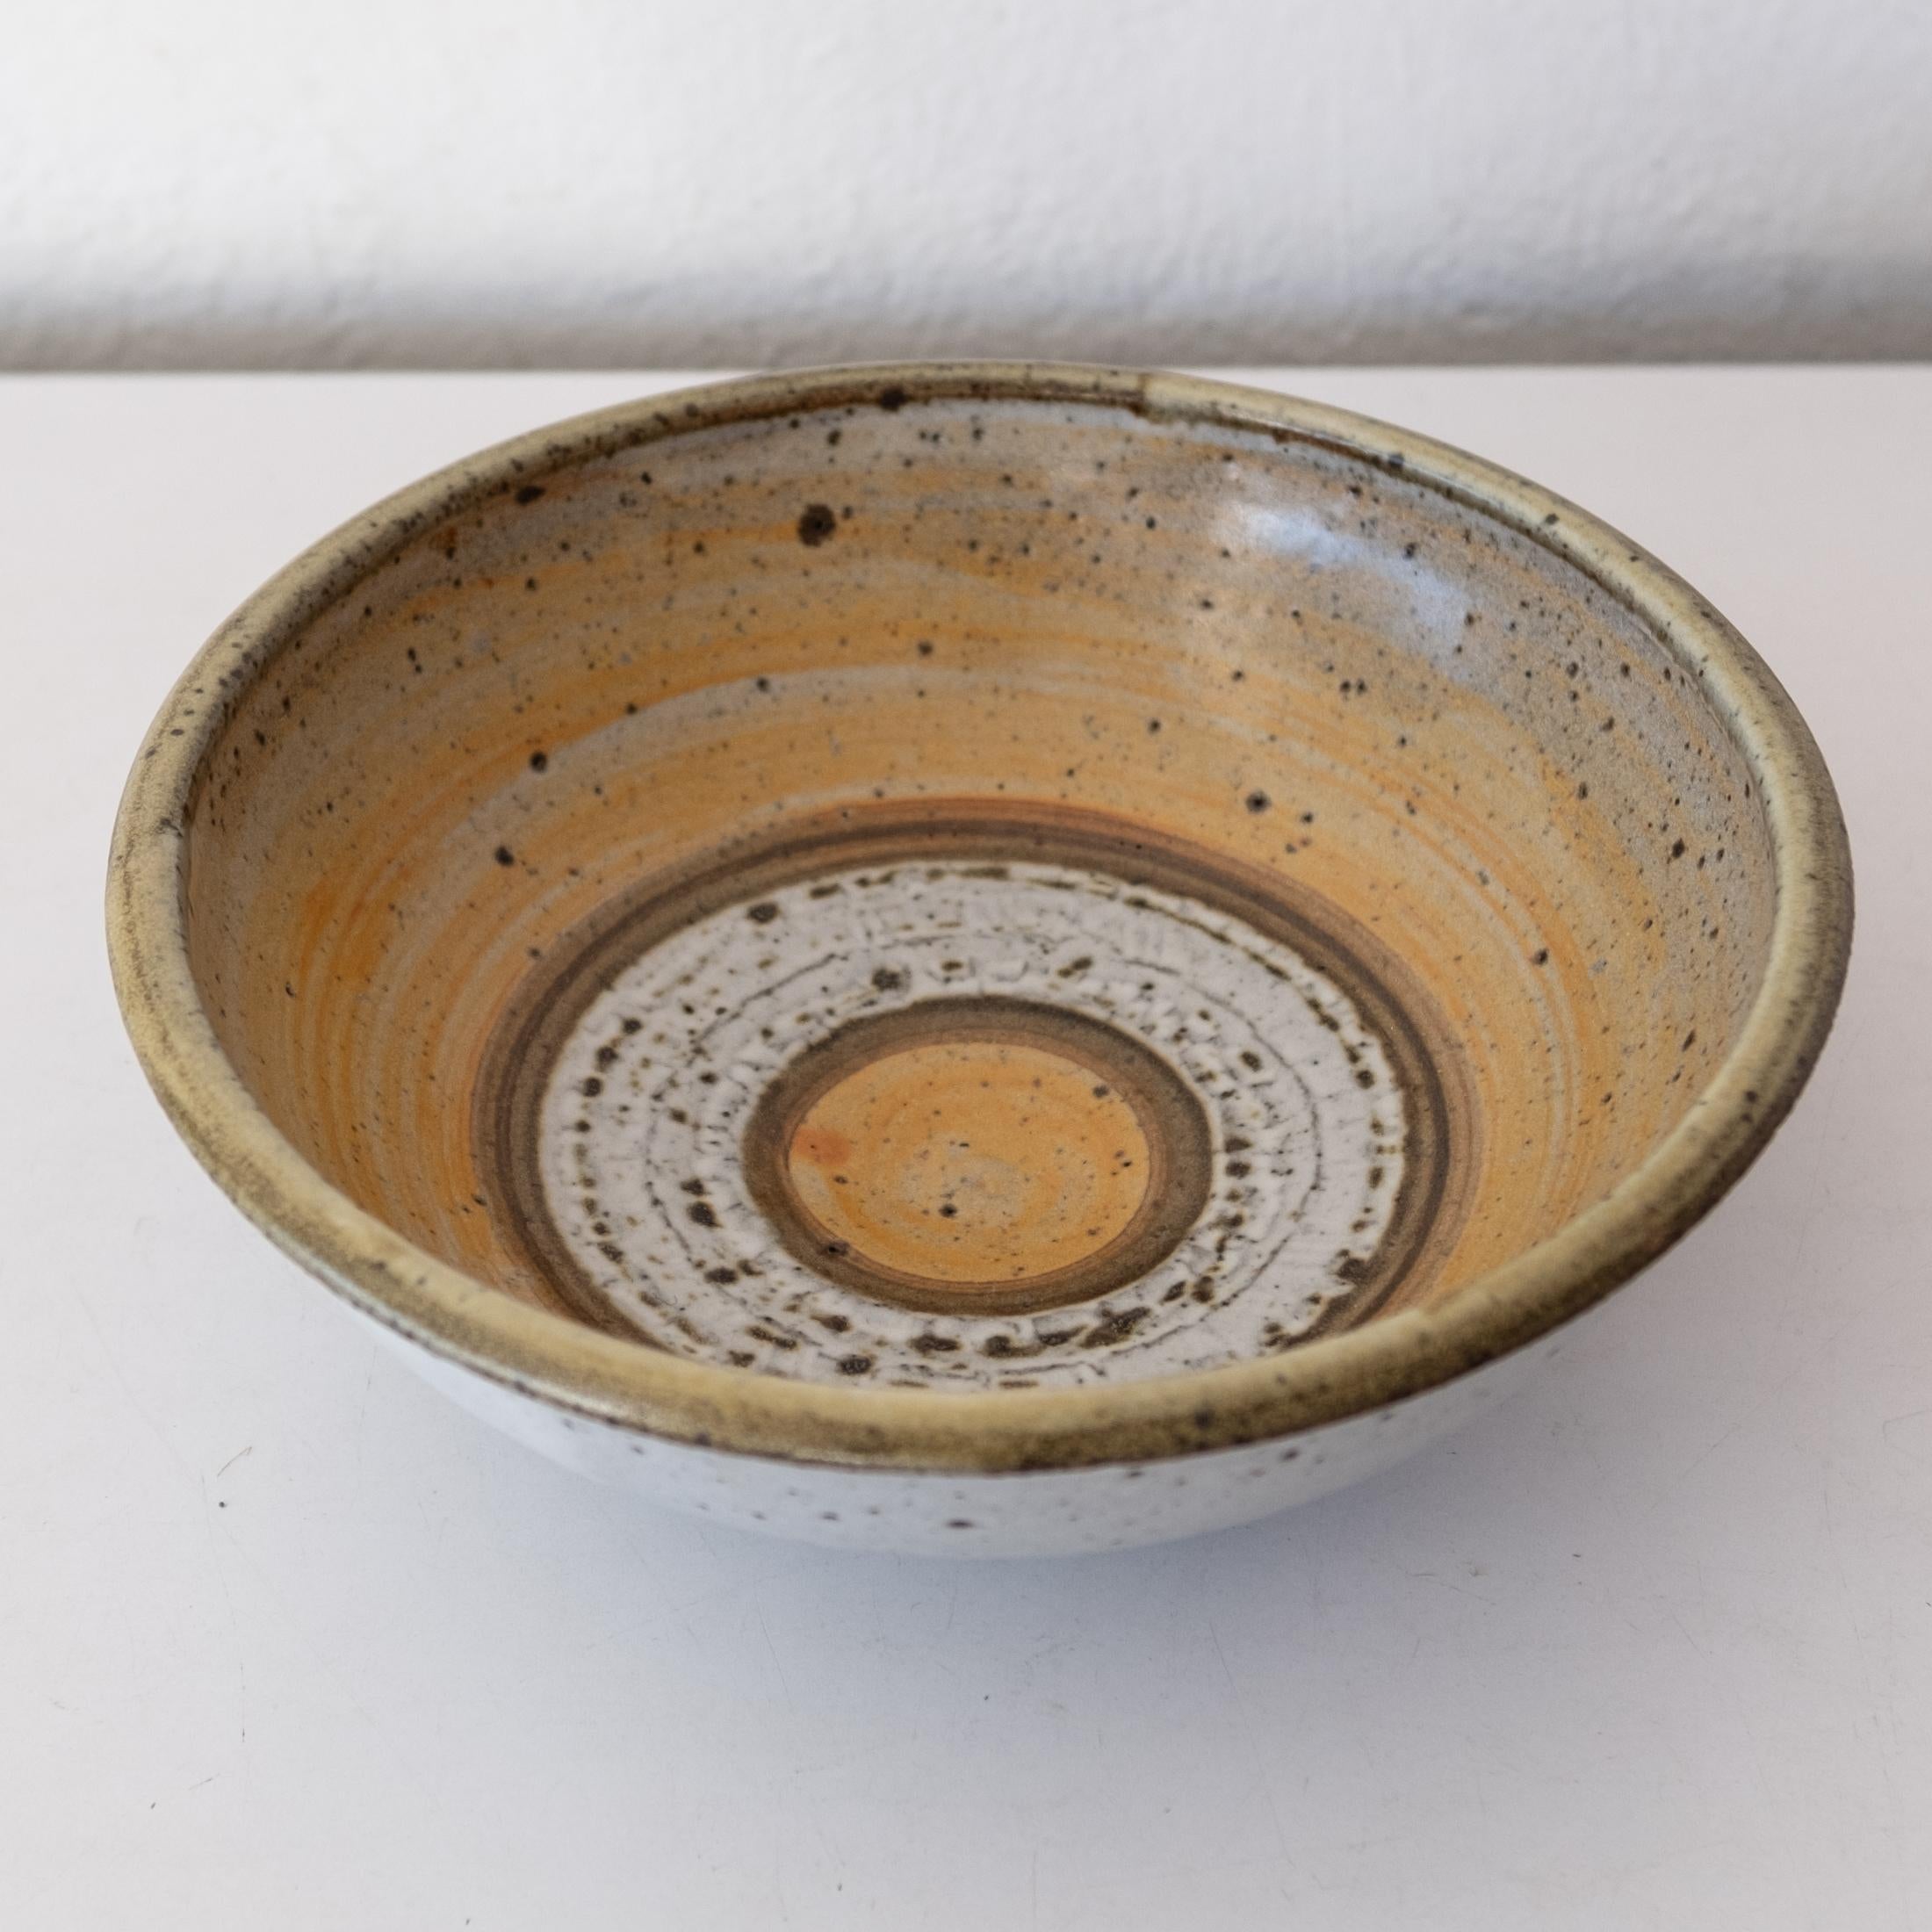 Stoneware bowl with wax resist decoration by California artist, Joel Edwards. 1960s

Joel Edwards. Los Angeles, CA. Studied at Otis Art Institute under Peter Voulkos. Creator of “Creative Crafts” Magazine, 1960-1964.

8.5 inches wide x 3 inches high